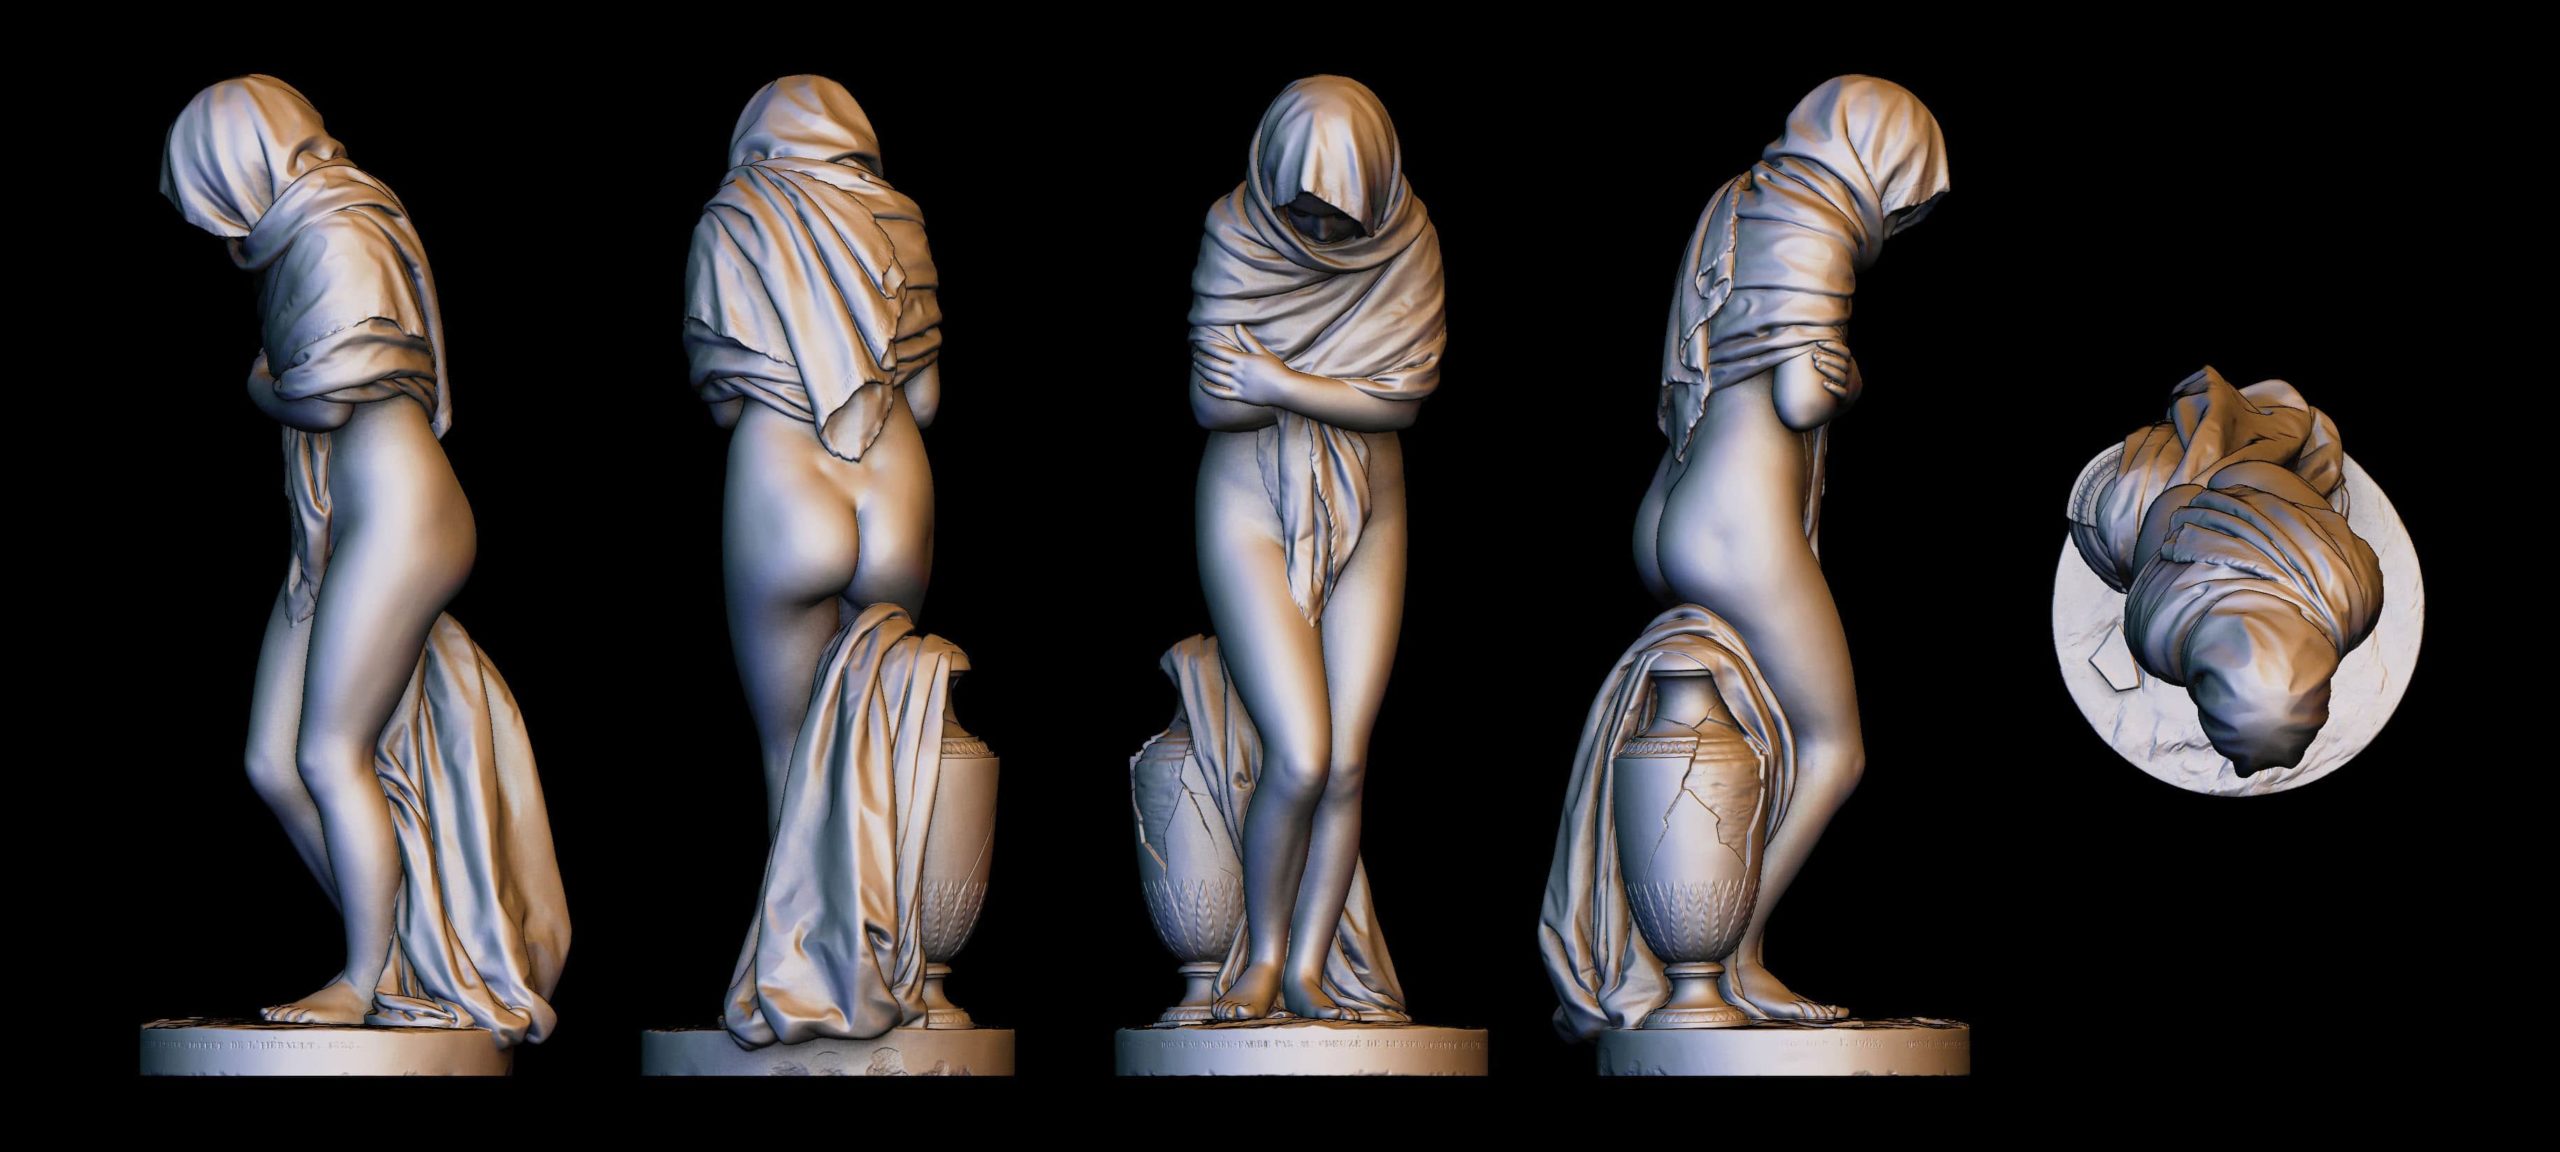 3D conceptualization of "Winter" by Houdon - © Tactile Studio